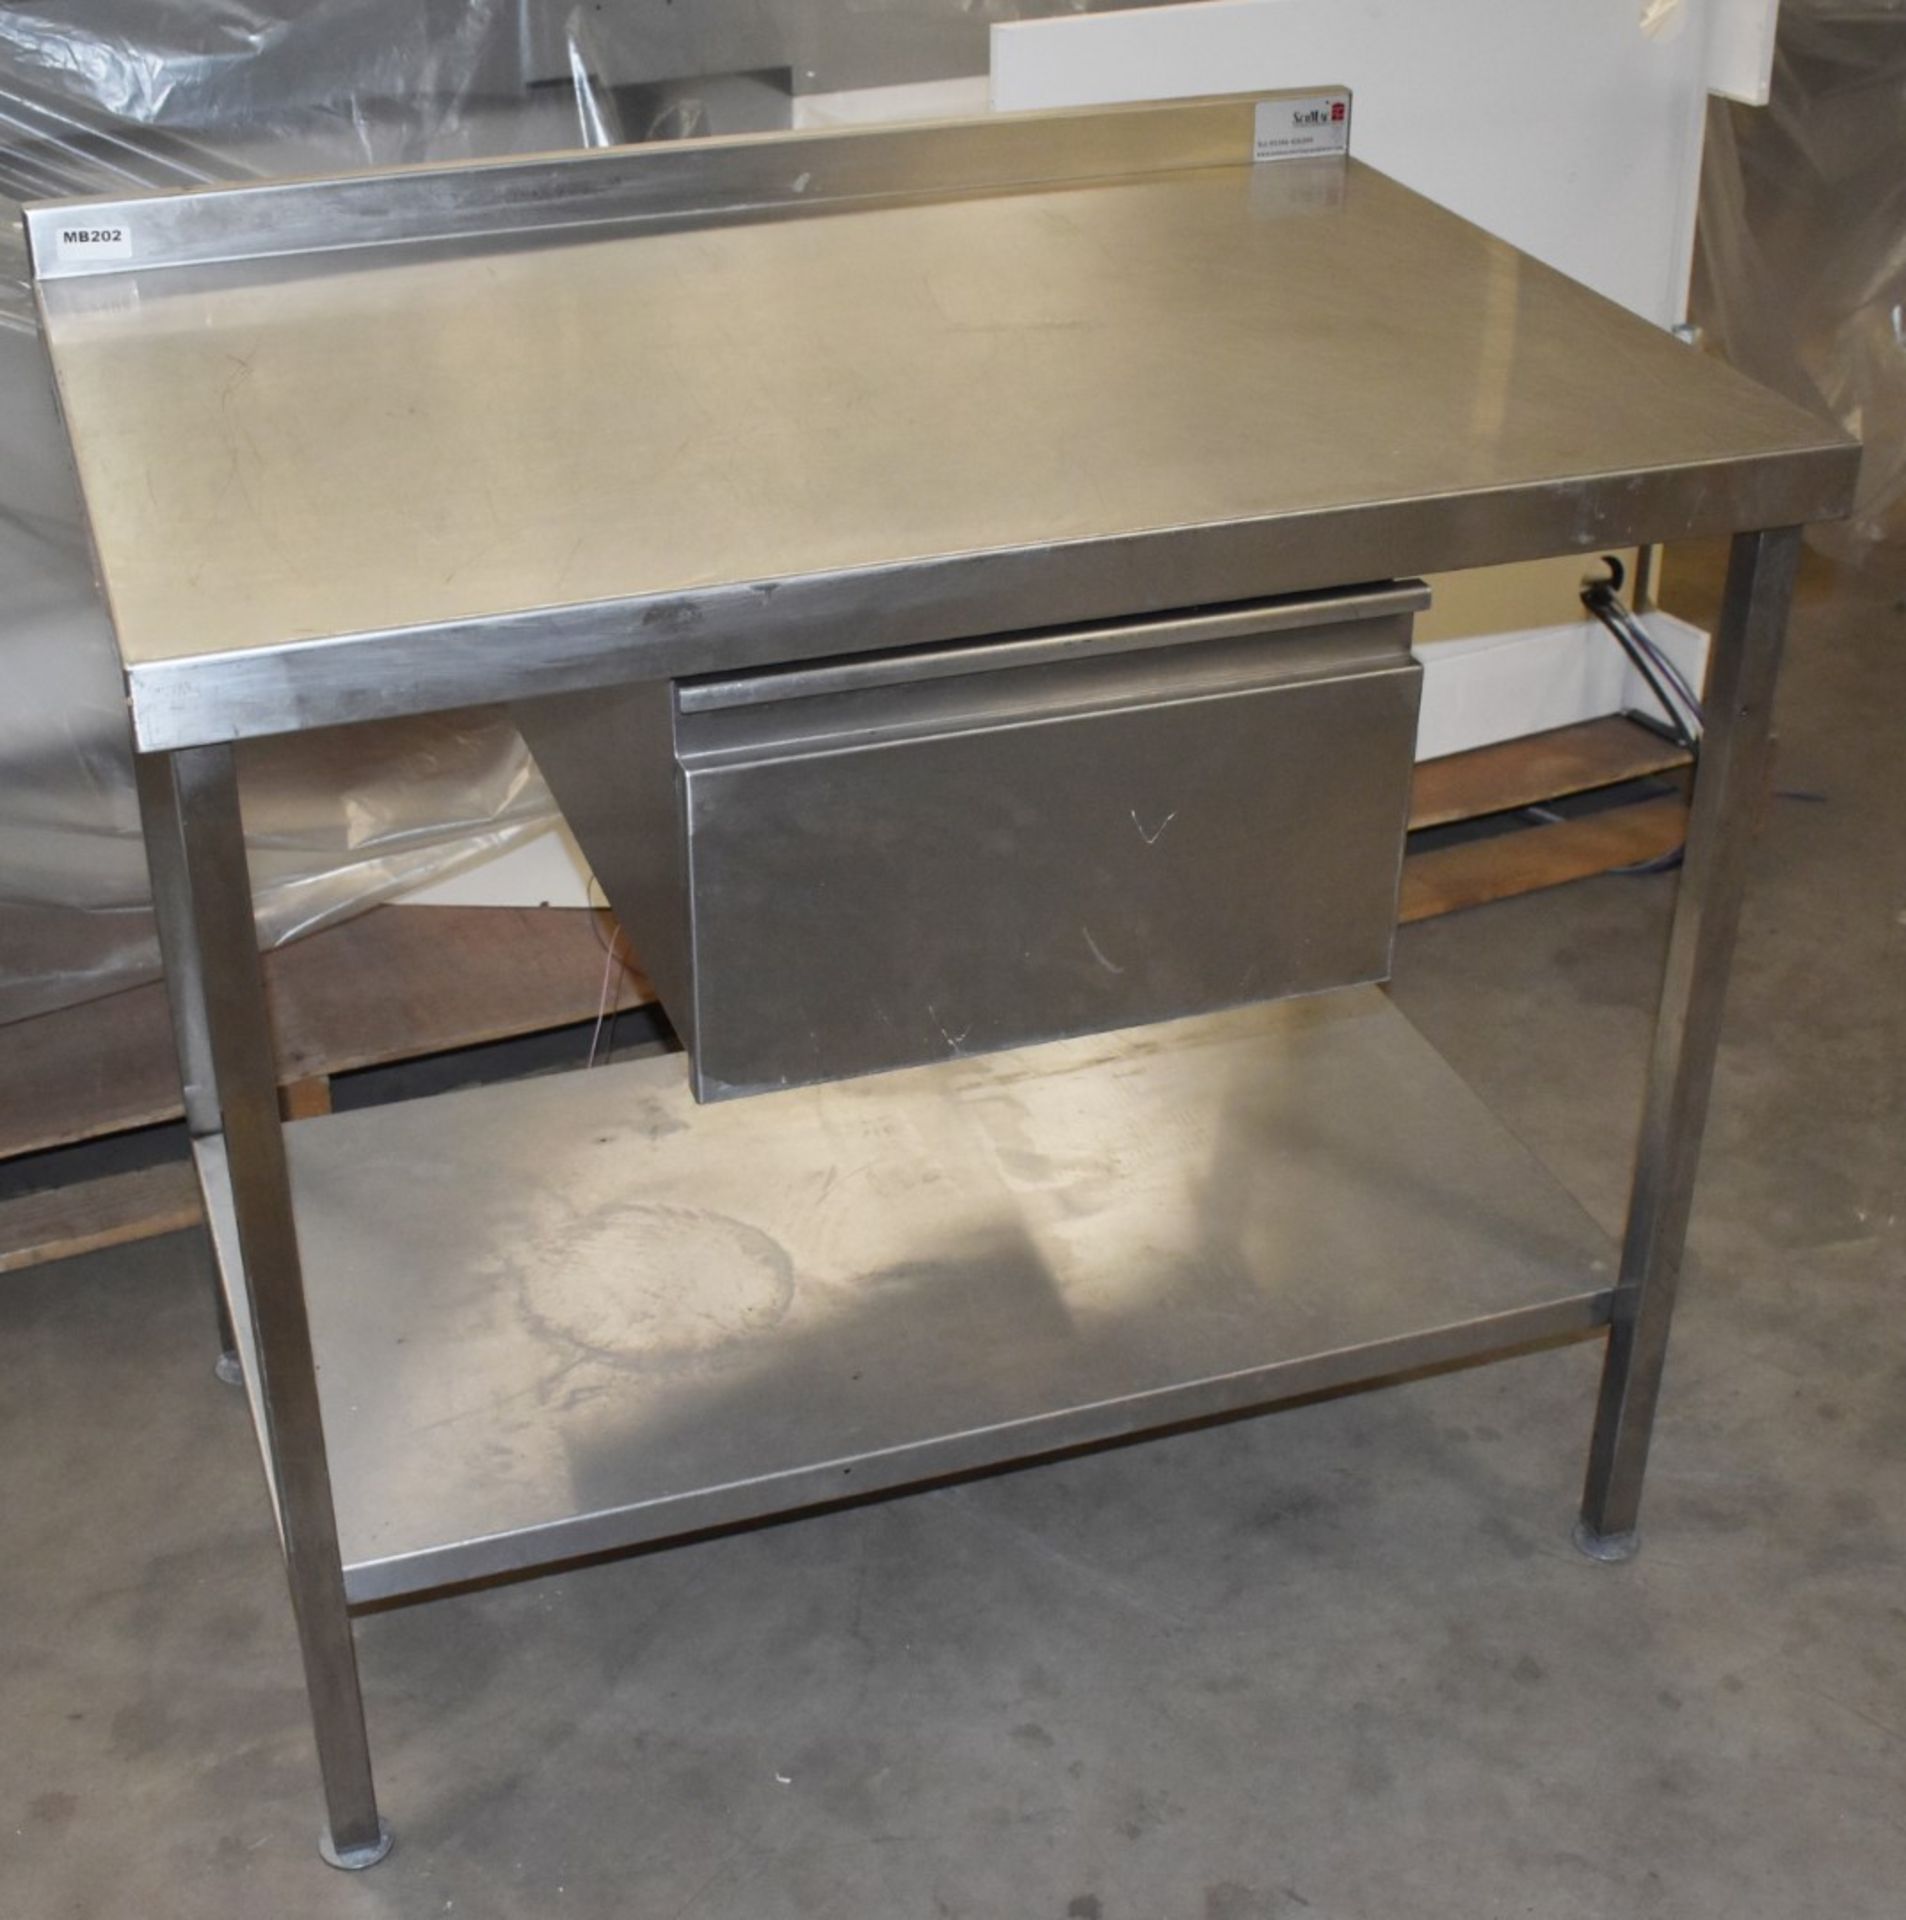 1 x Stainless Steel Prep Bench With Undershelf, Upstand and Central Drawer - H86 x W100 x D70